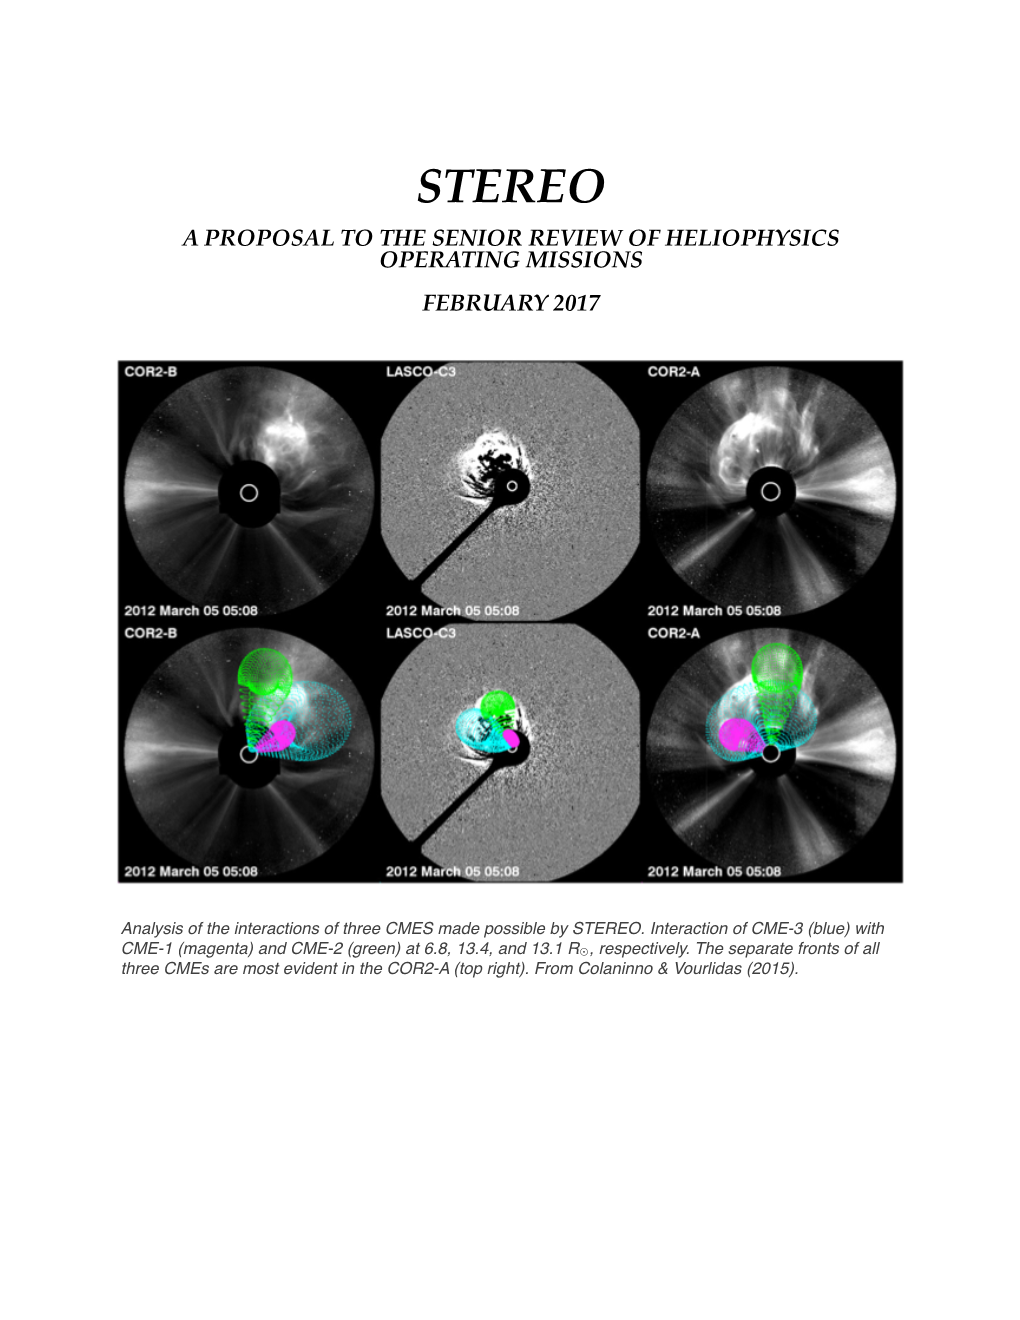 STEREO 2017 Senior Review Proposal